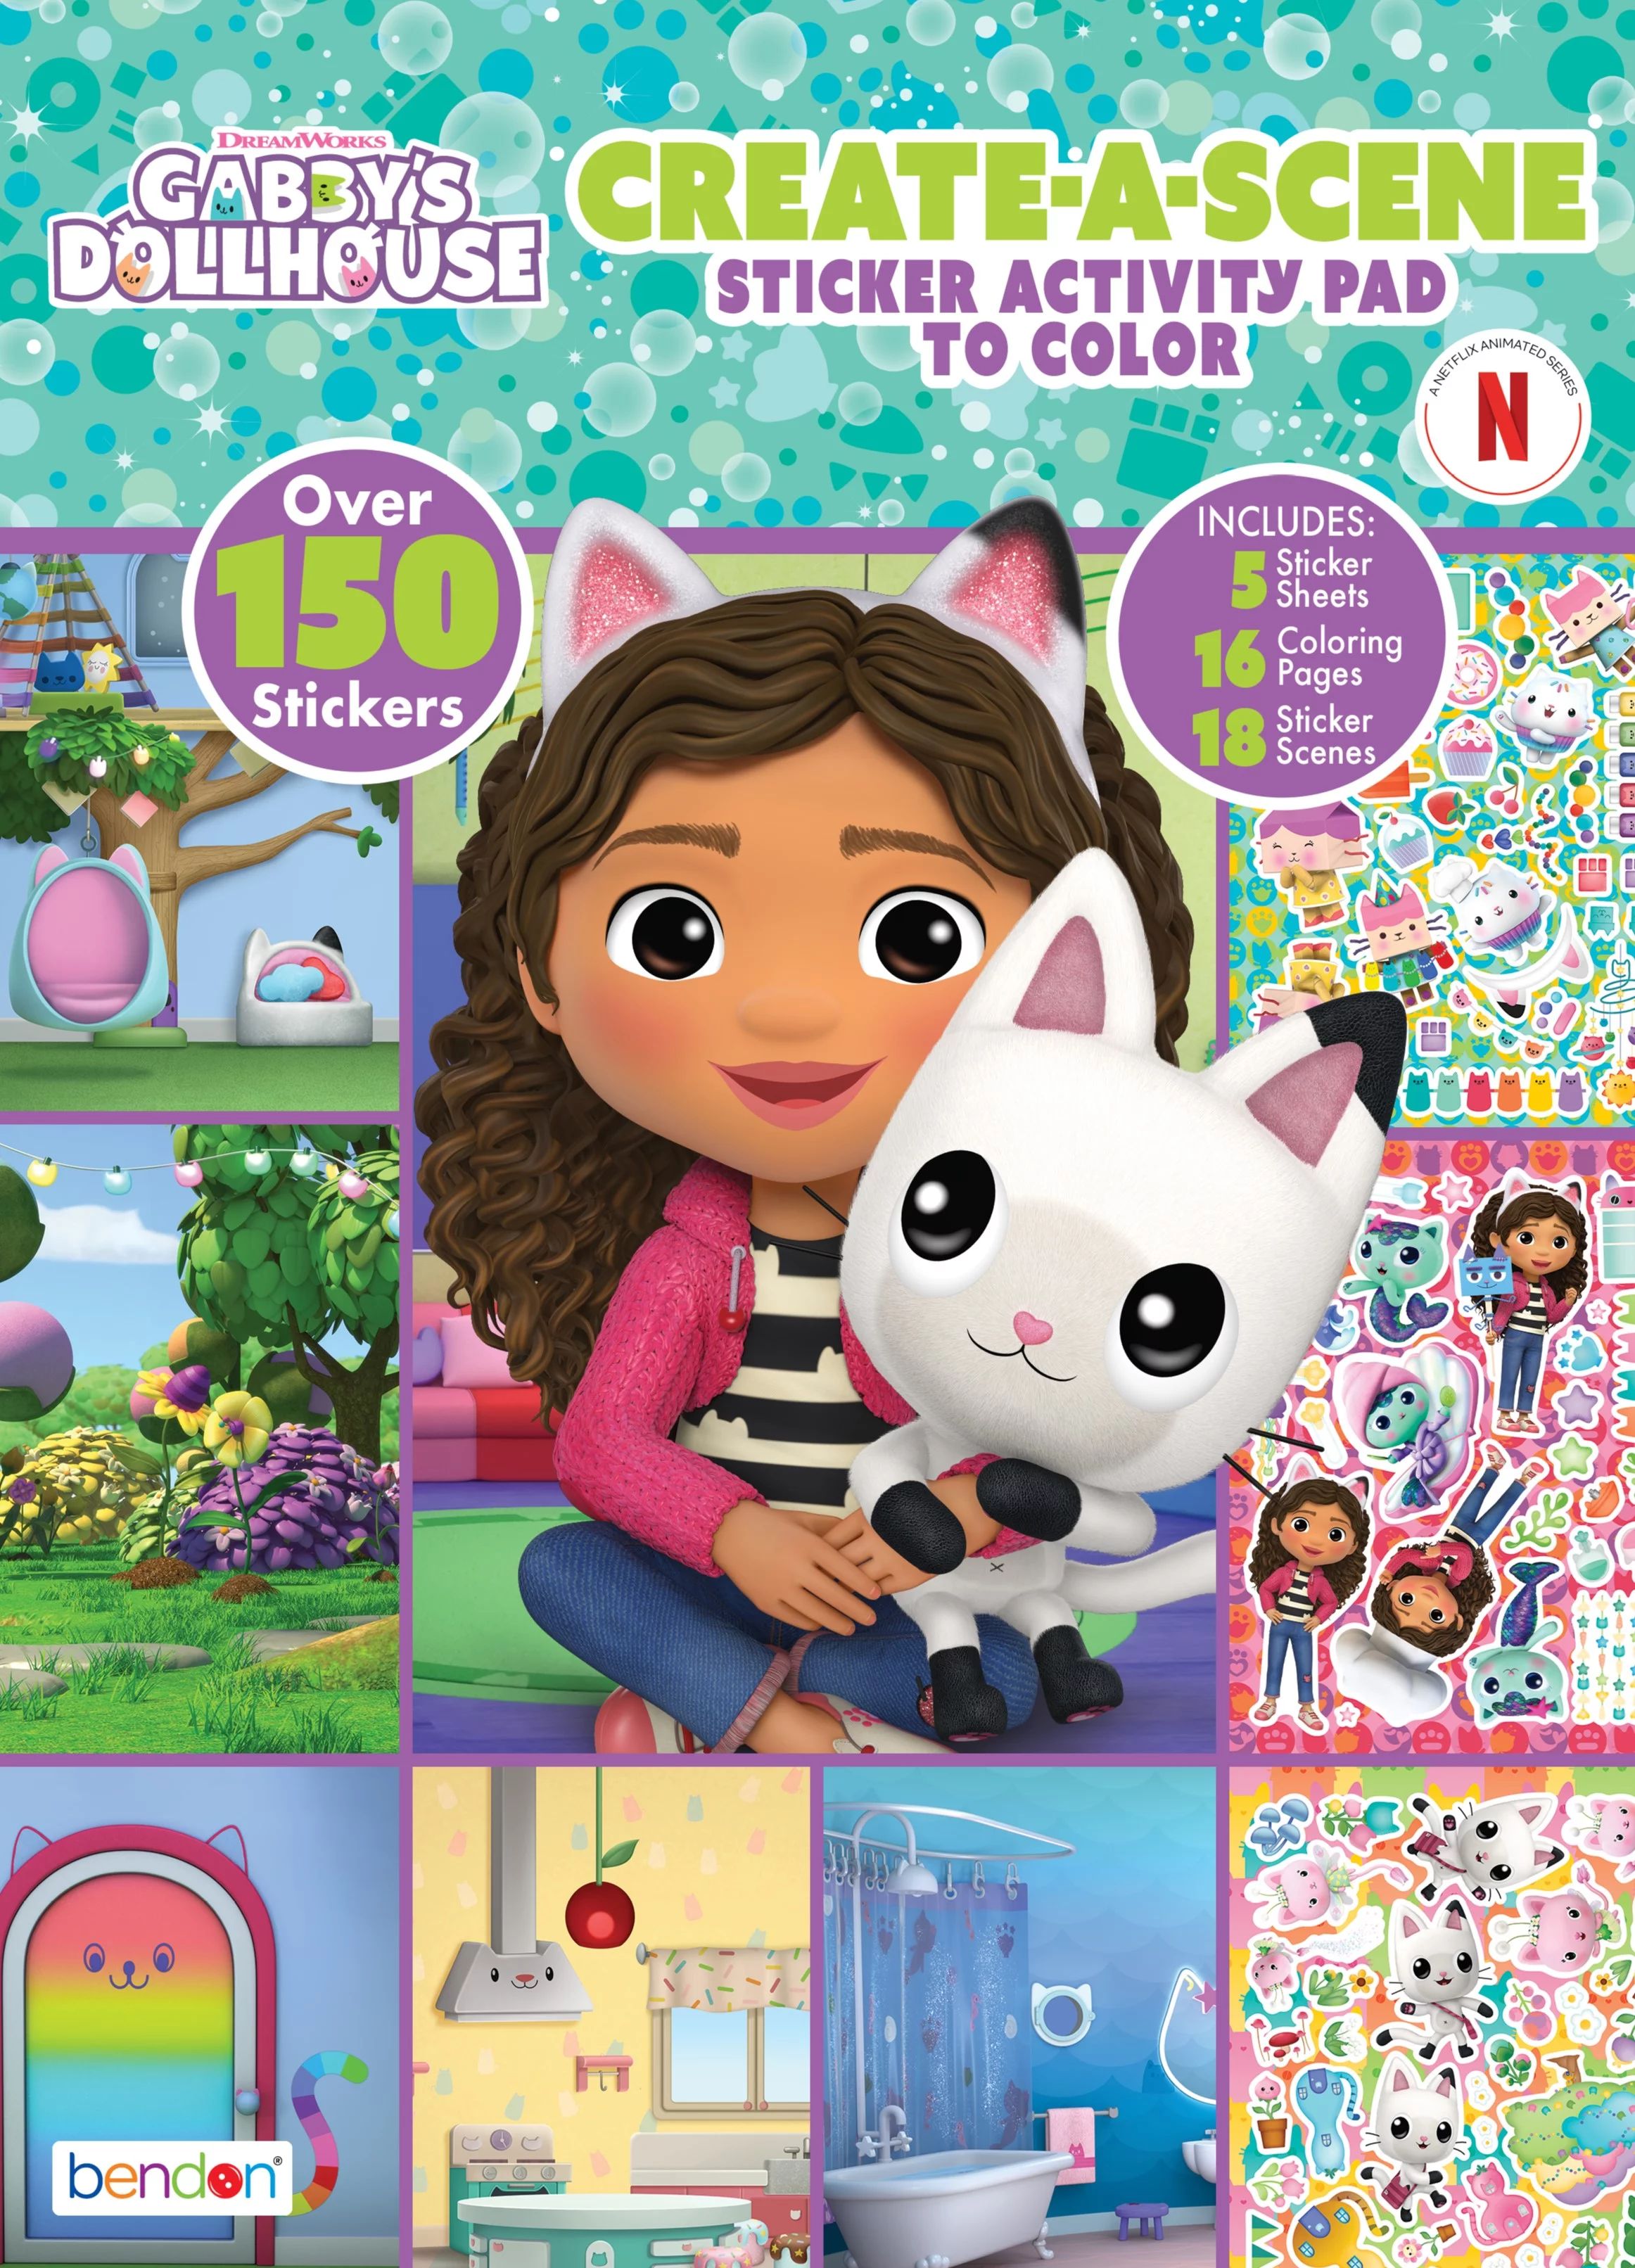 Gabby's Dollhouse Create a Scene Sticker Book,34 Pages with 5 Sticker Sheets | Walmart (US)